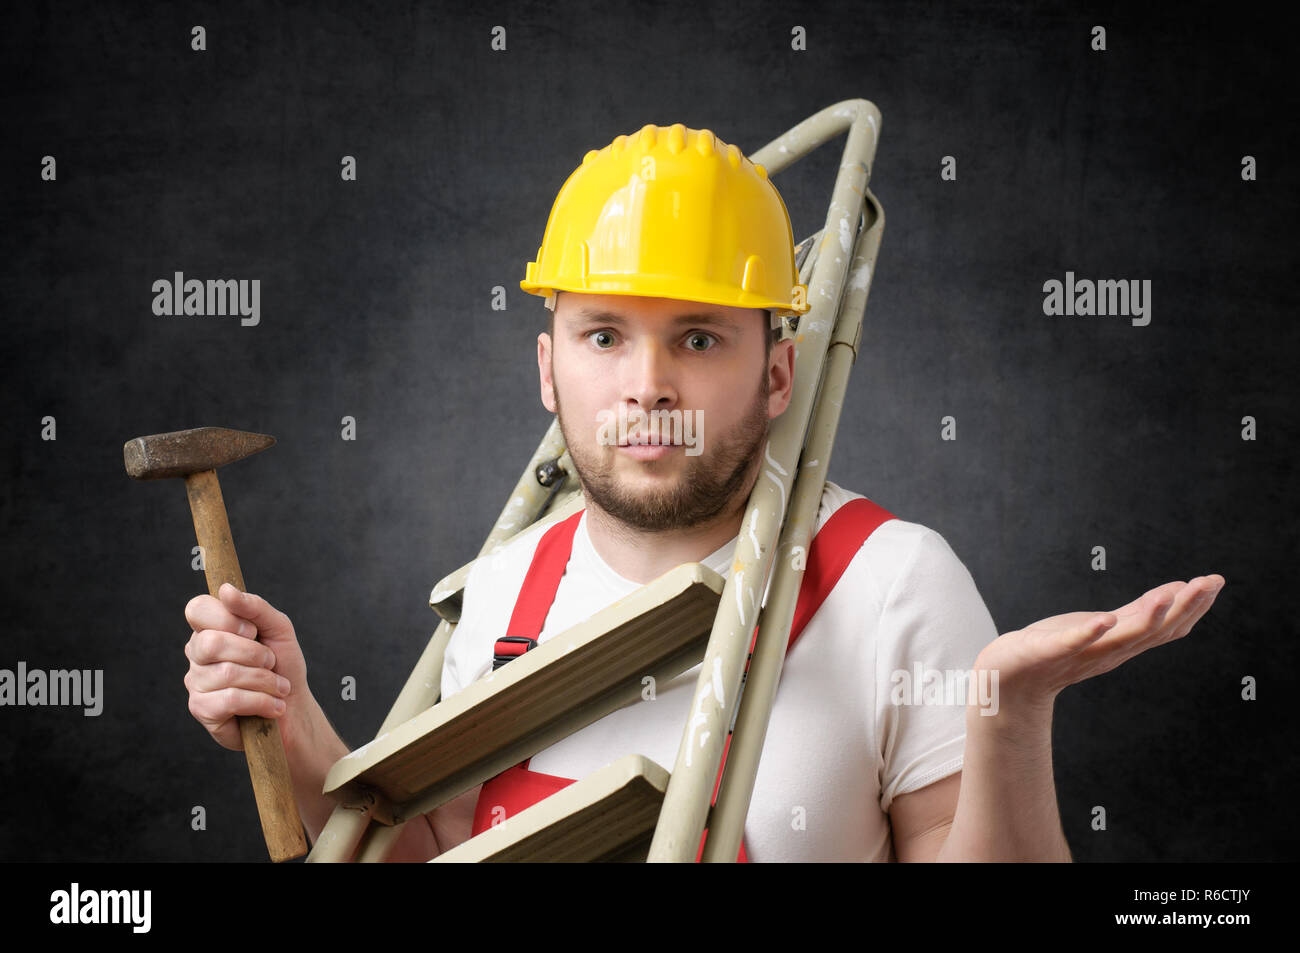 Clumsy worker with tools Stock Photo